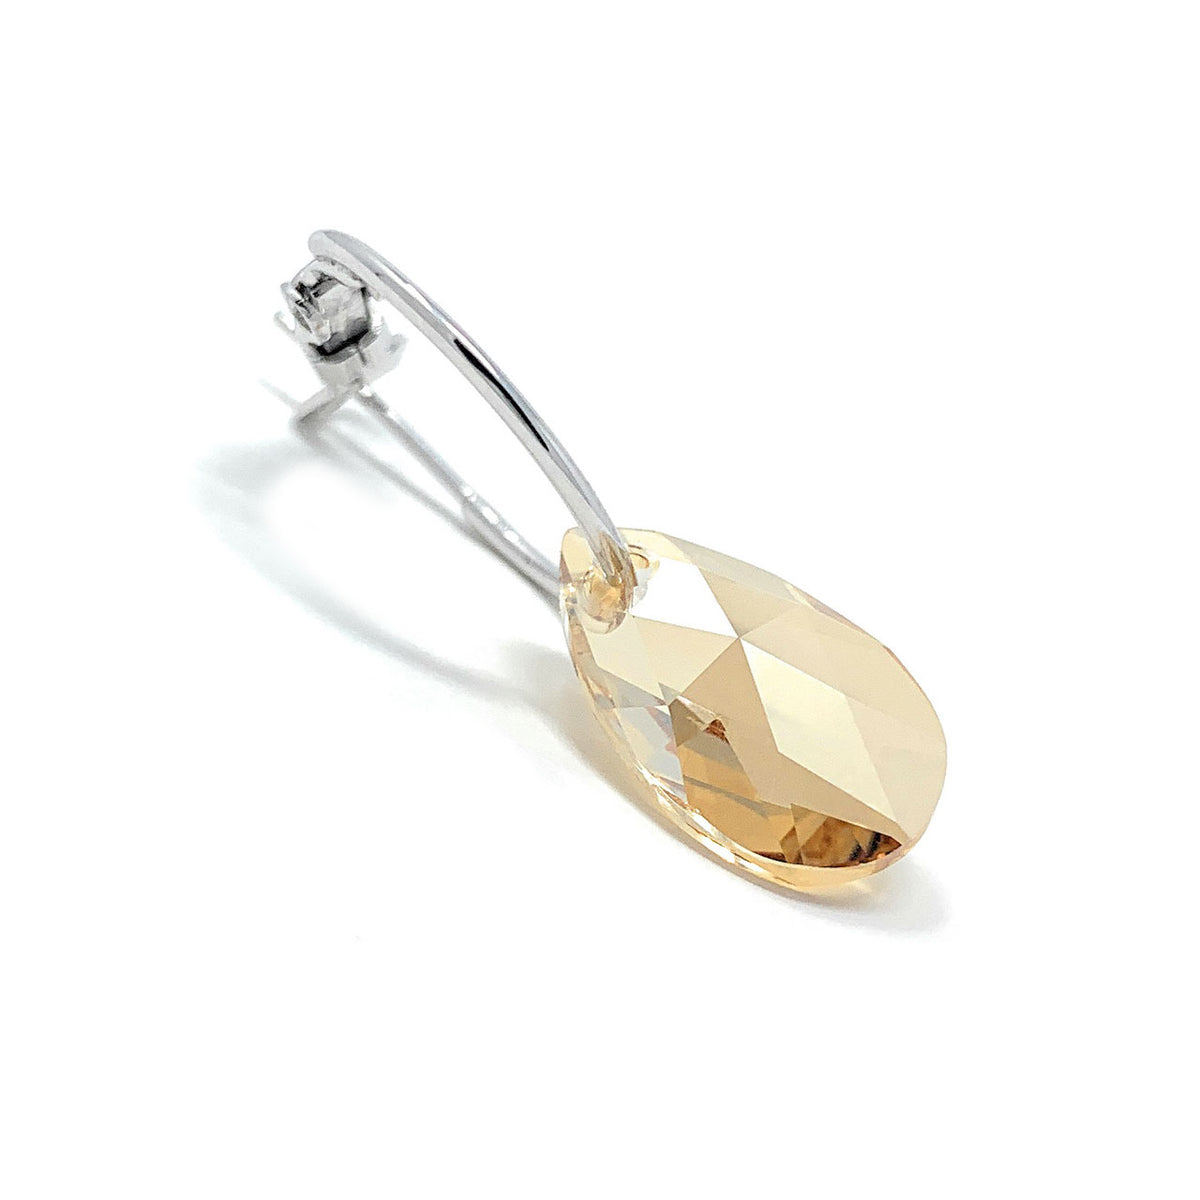 Aurora Small Drop Earrings with Yellow Beige Golden Shadow Pear Crystals from Swarovski Silver Toned Rhodium Plated - Ed Heart